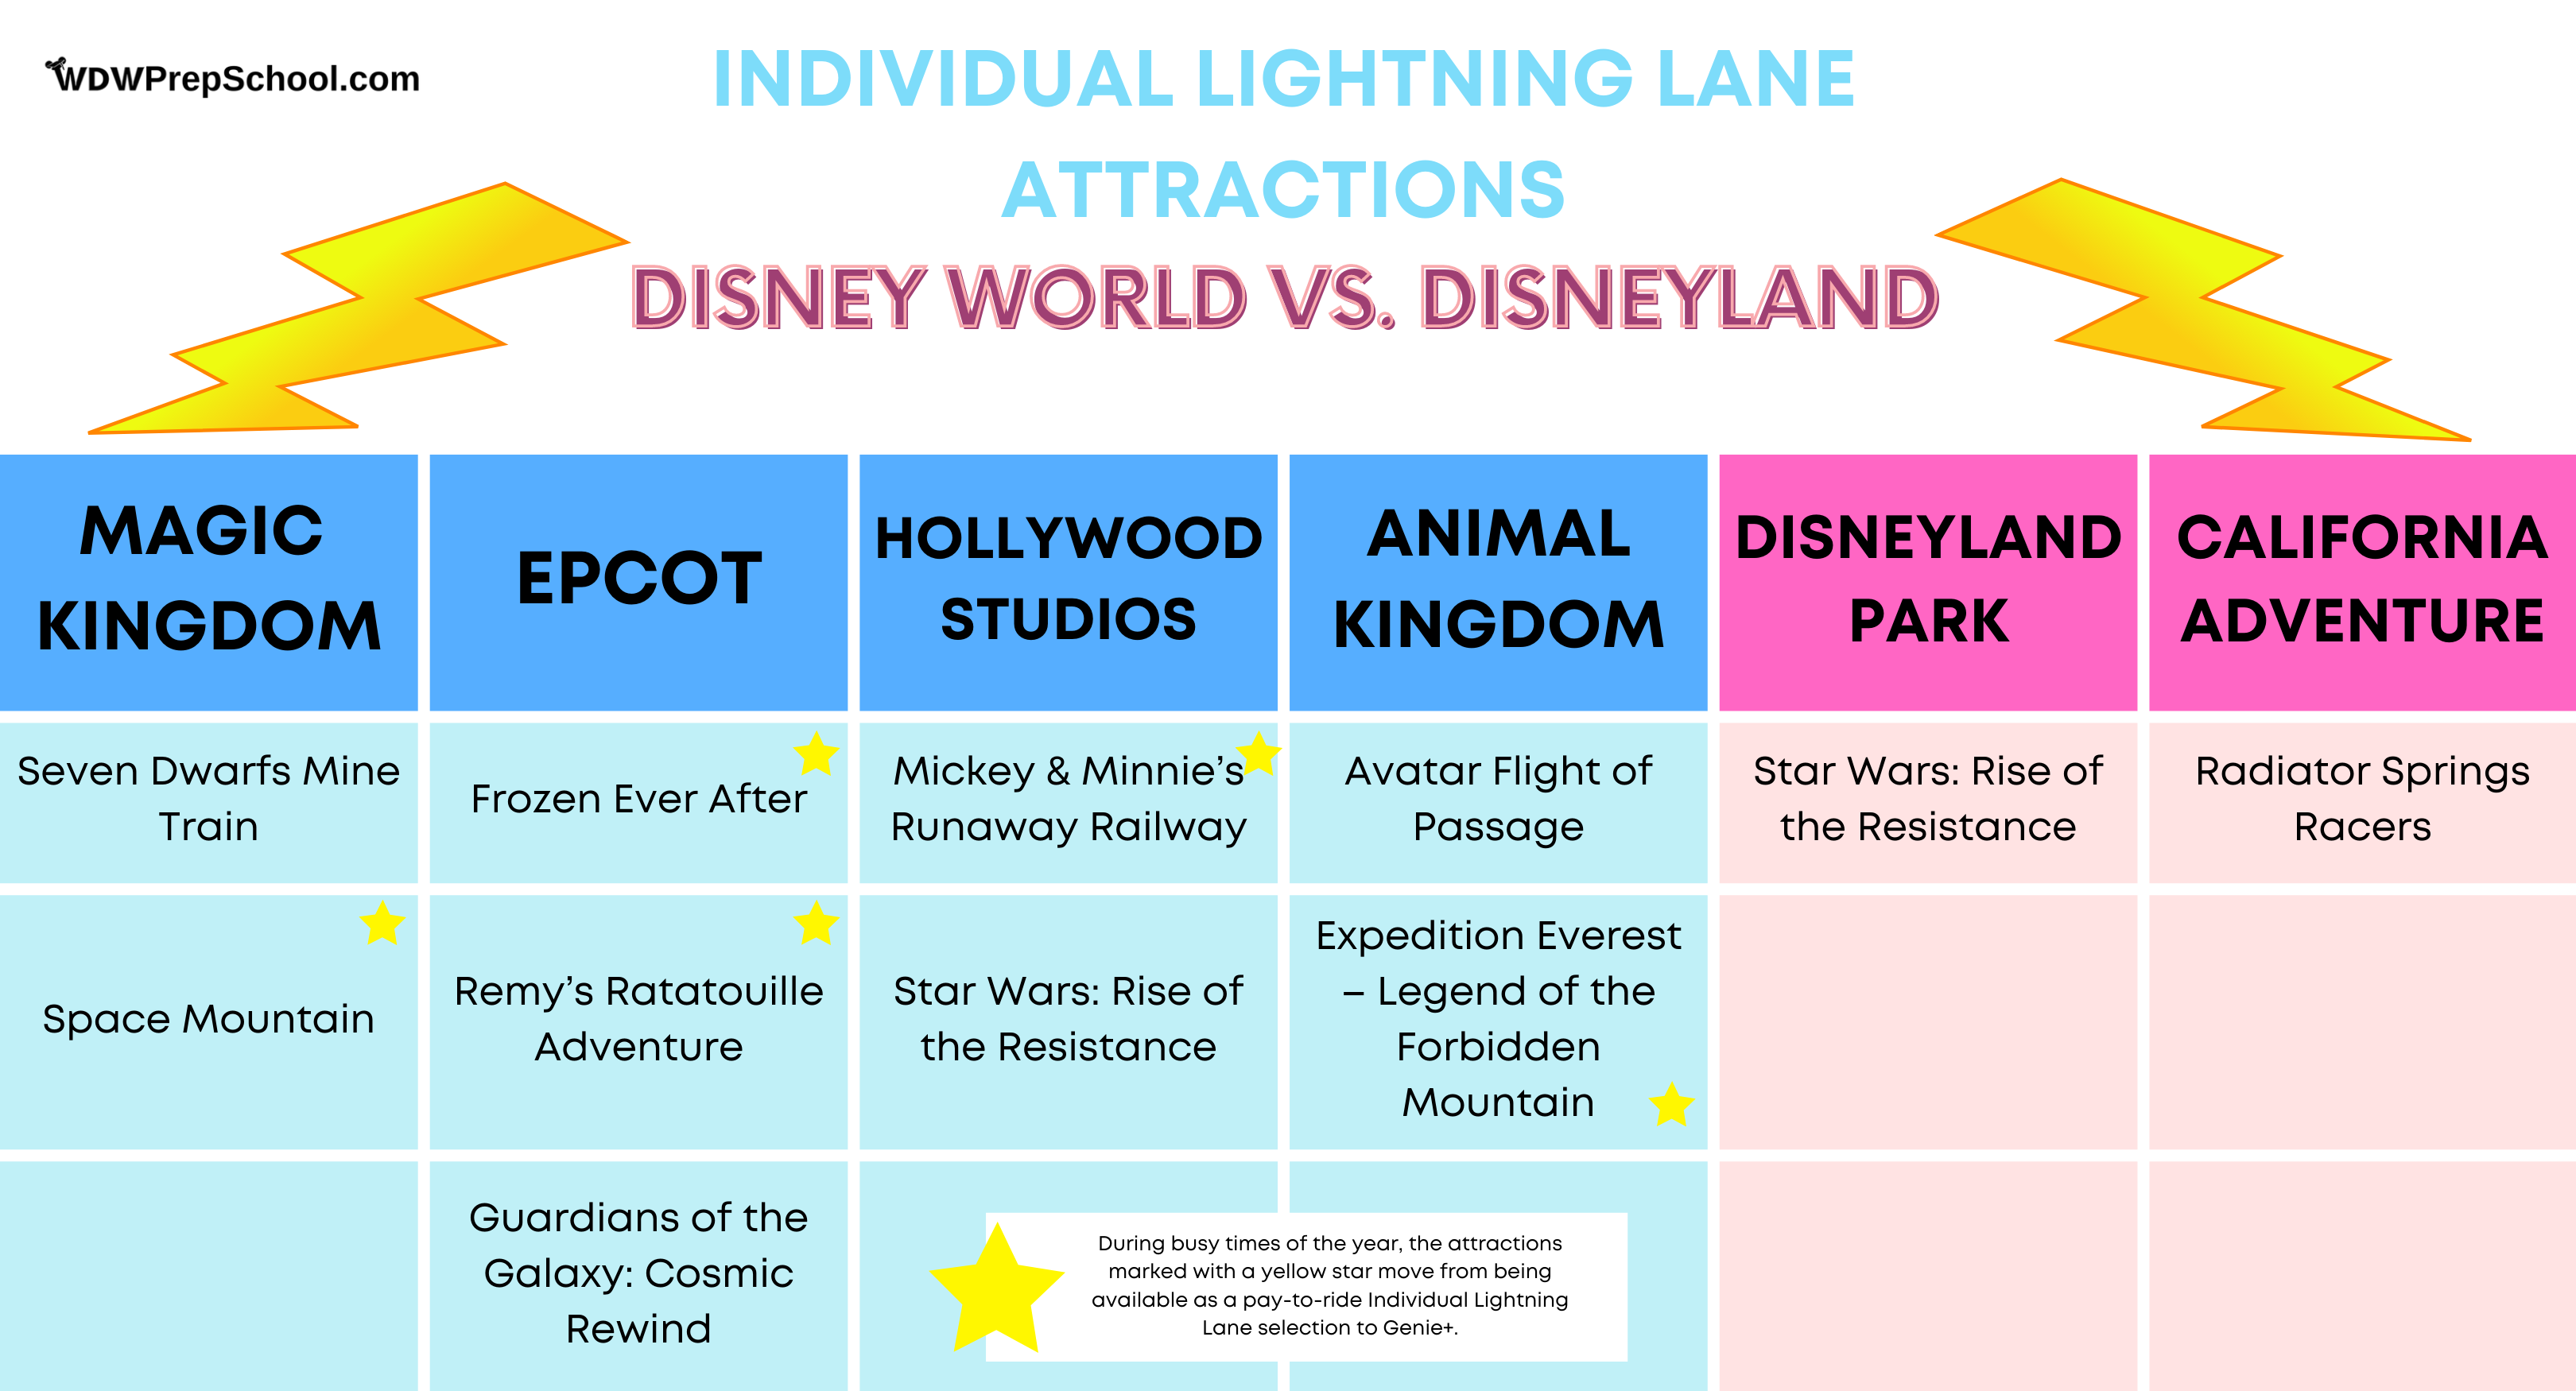 comparing dl and wdw lightning lanes